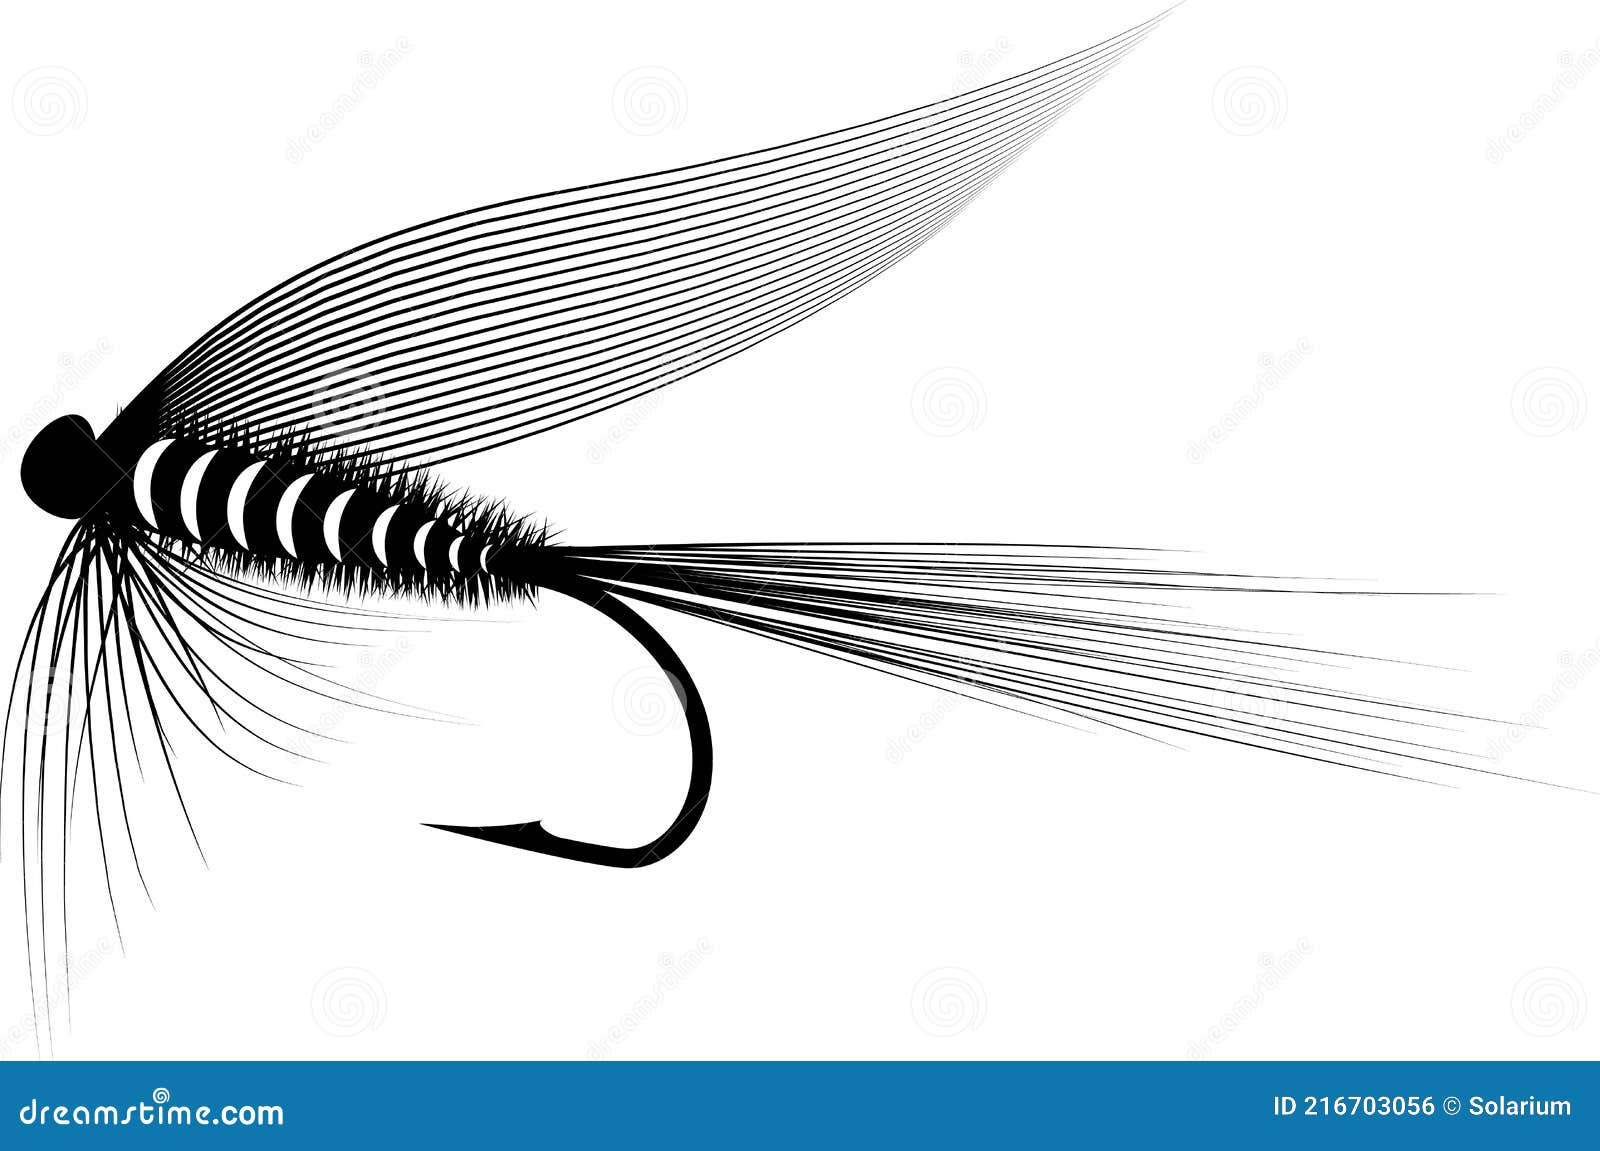 Dry Fly Fishing Stock Illustrations – 44 Dry Fly Fishing Stock Illustrations,  Vectors & Clipart - Dreamstime